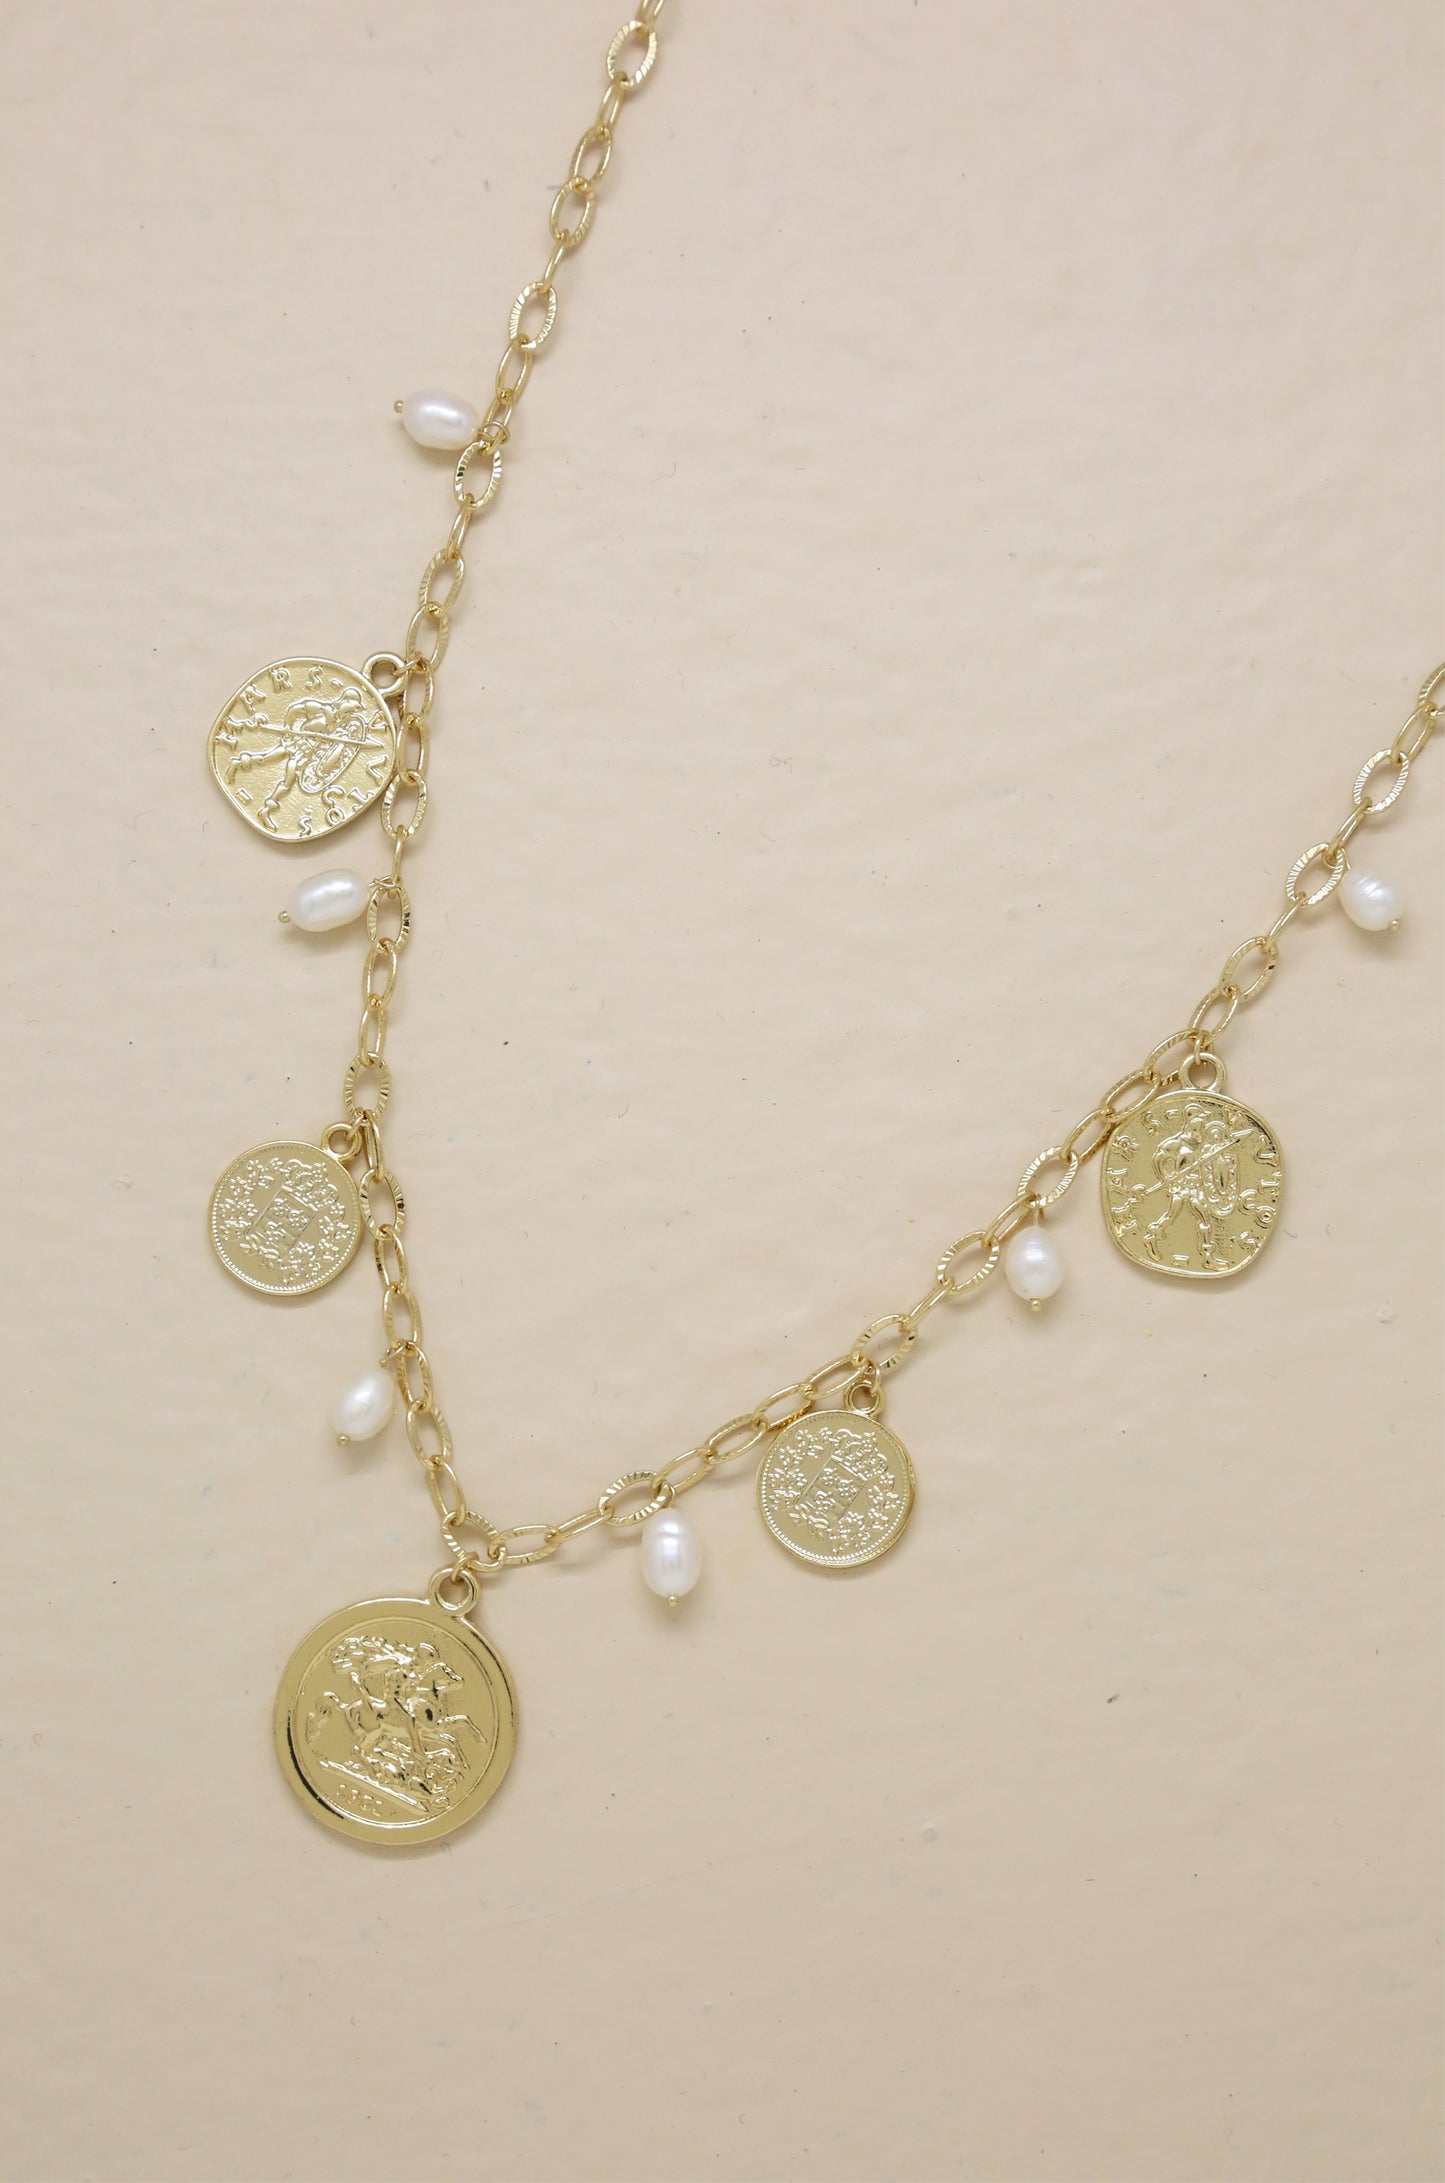 Treasure Hunter 18k Gold Plated Coin and Pearl Necklace on slate background  